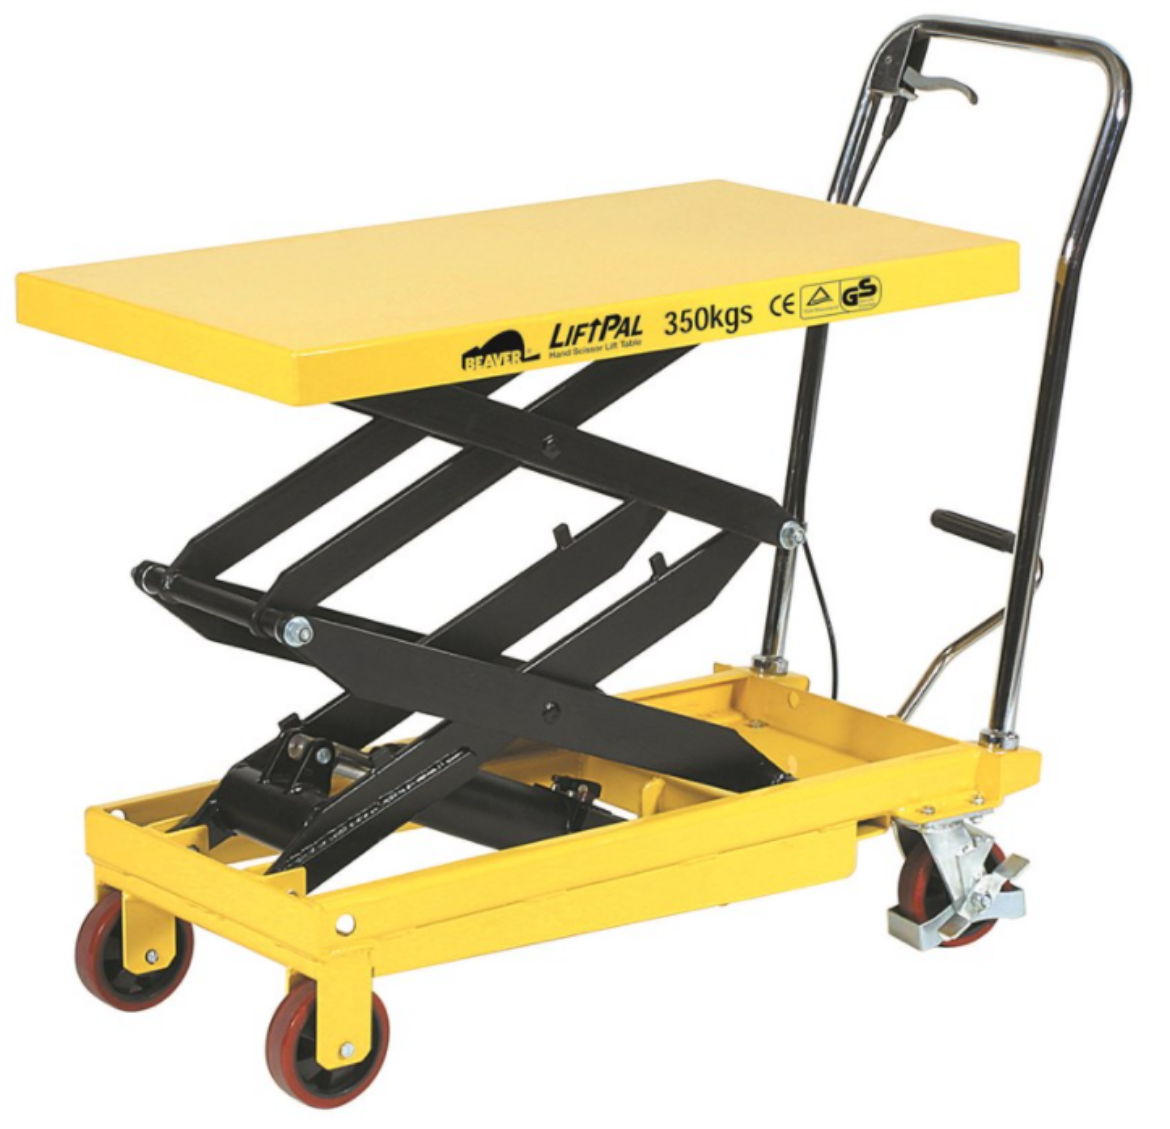 Picture of 350Kg Scis/Plt Hyd Lift Table Model Tfd35